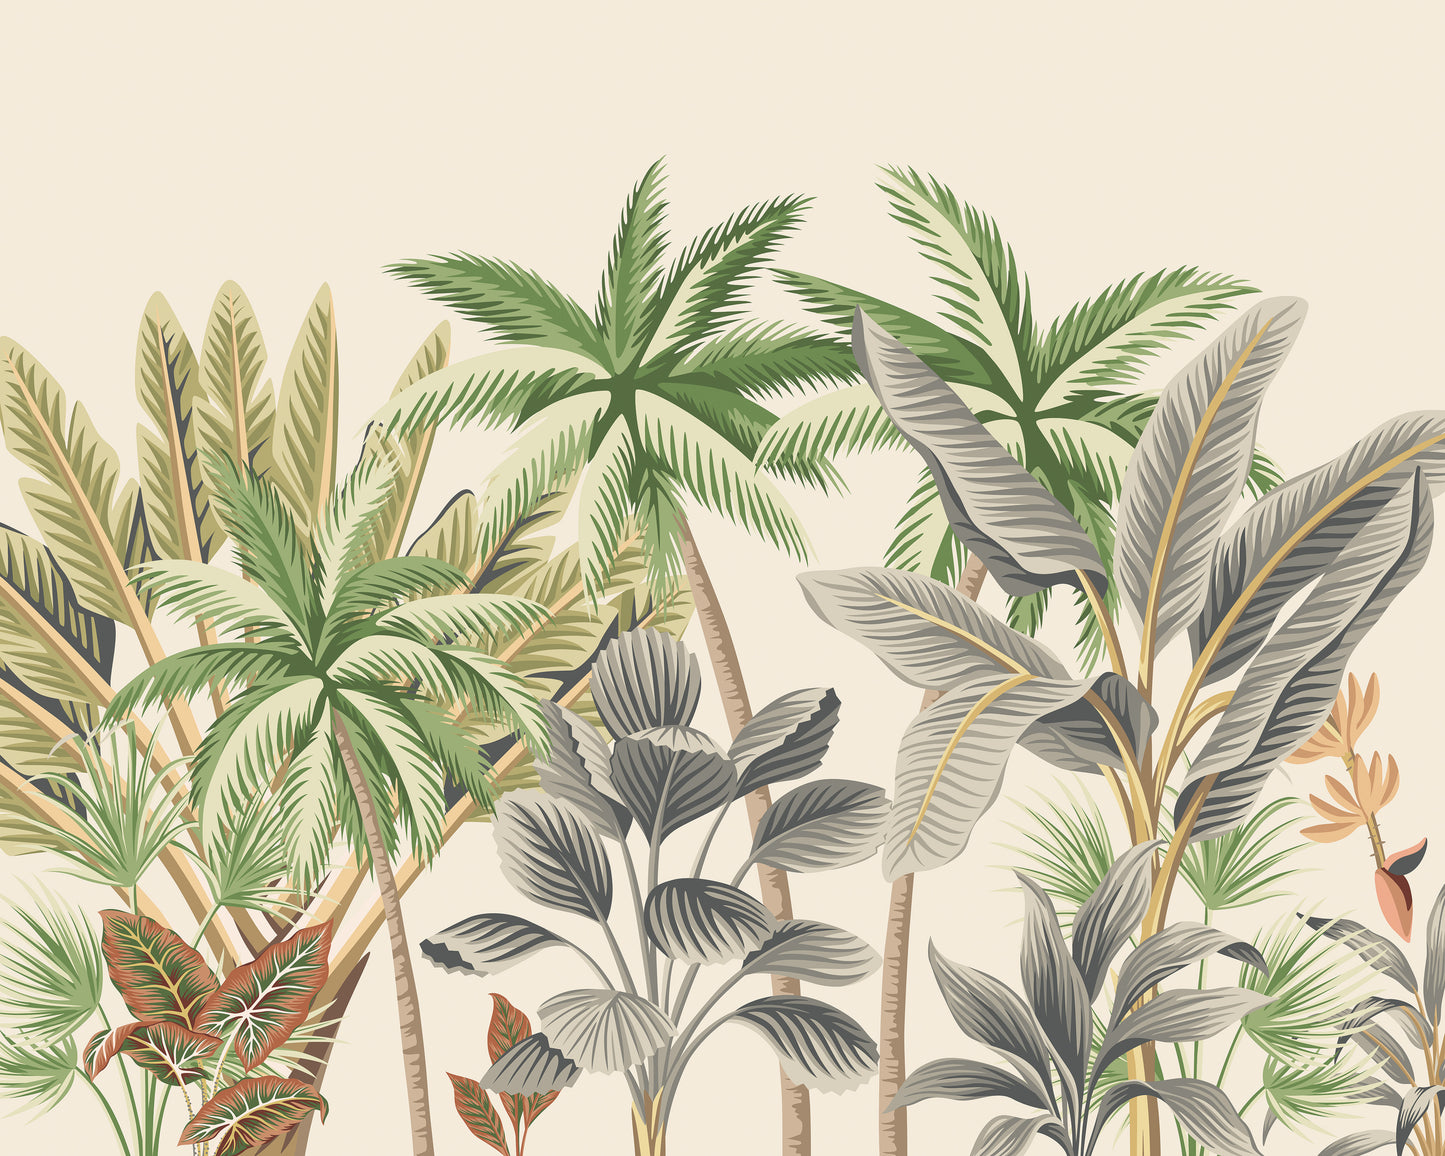 TROPICAL PALM TREES - Natural